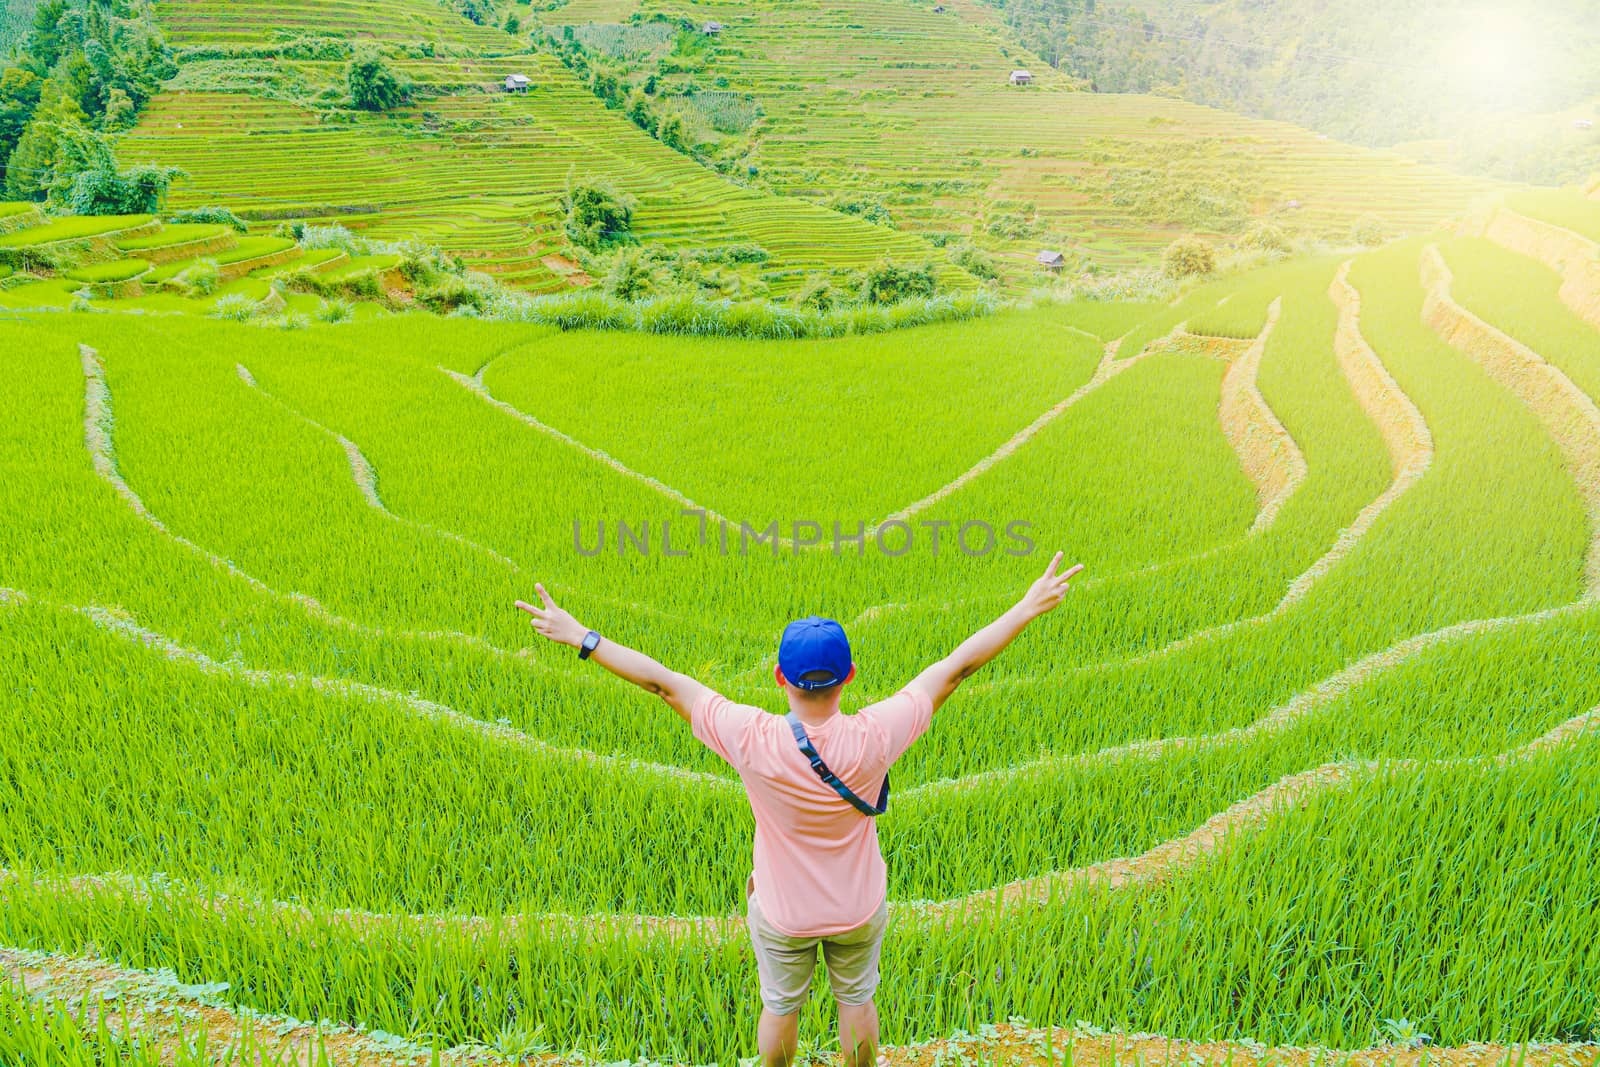 The only man standing with his back beautiful terraced rice paddy field and mountain landscape in Mu Cang Chai and SAPA VIETNAM Sunlight and flare background concept.